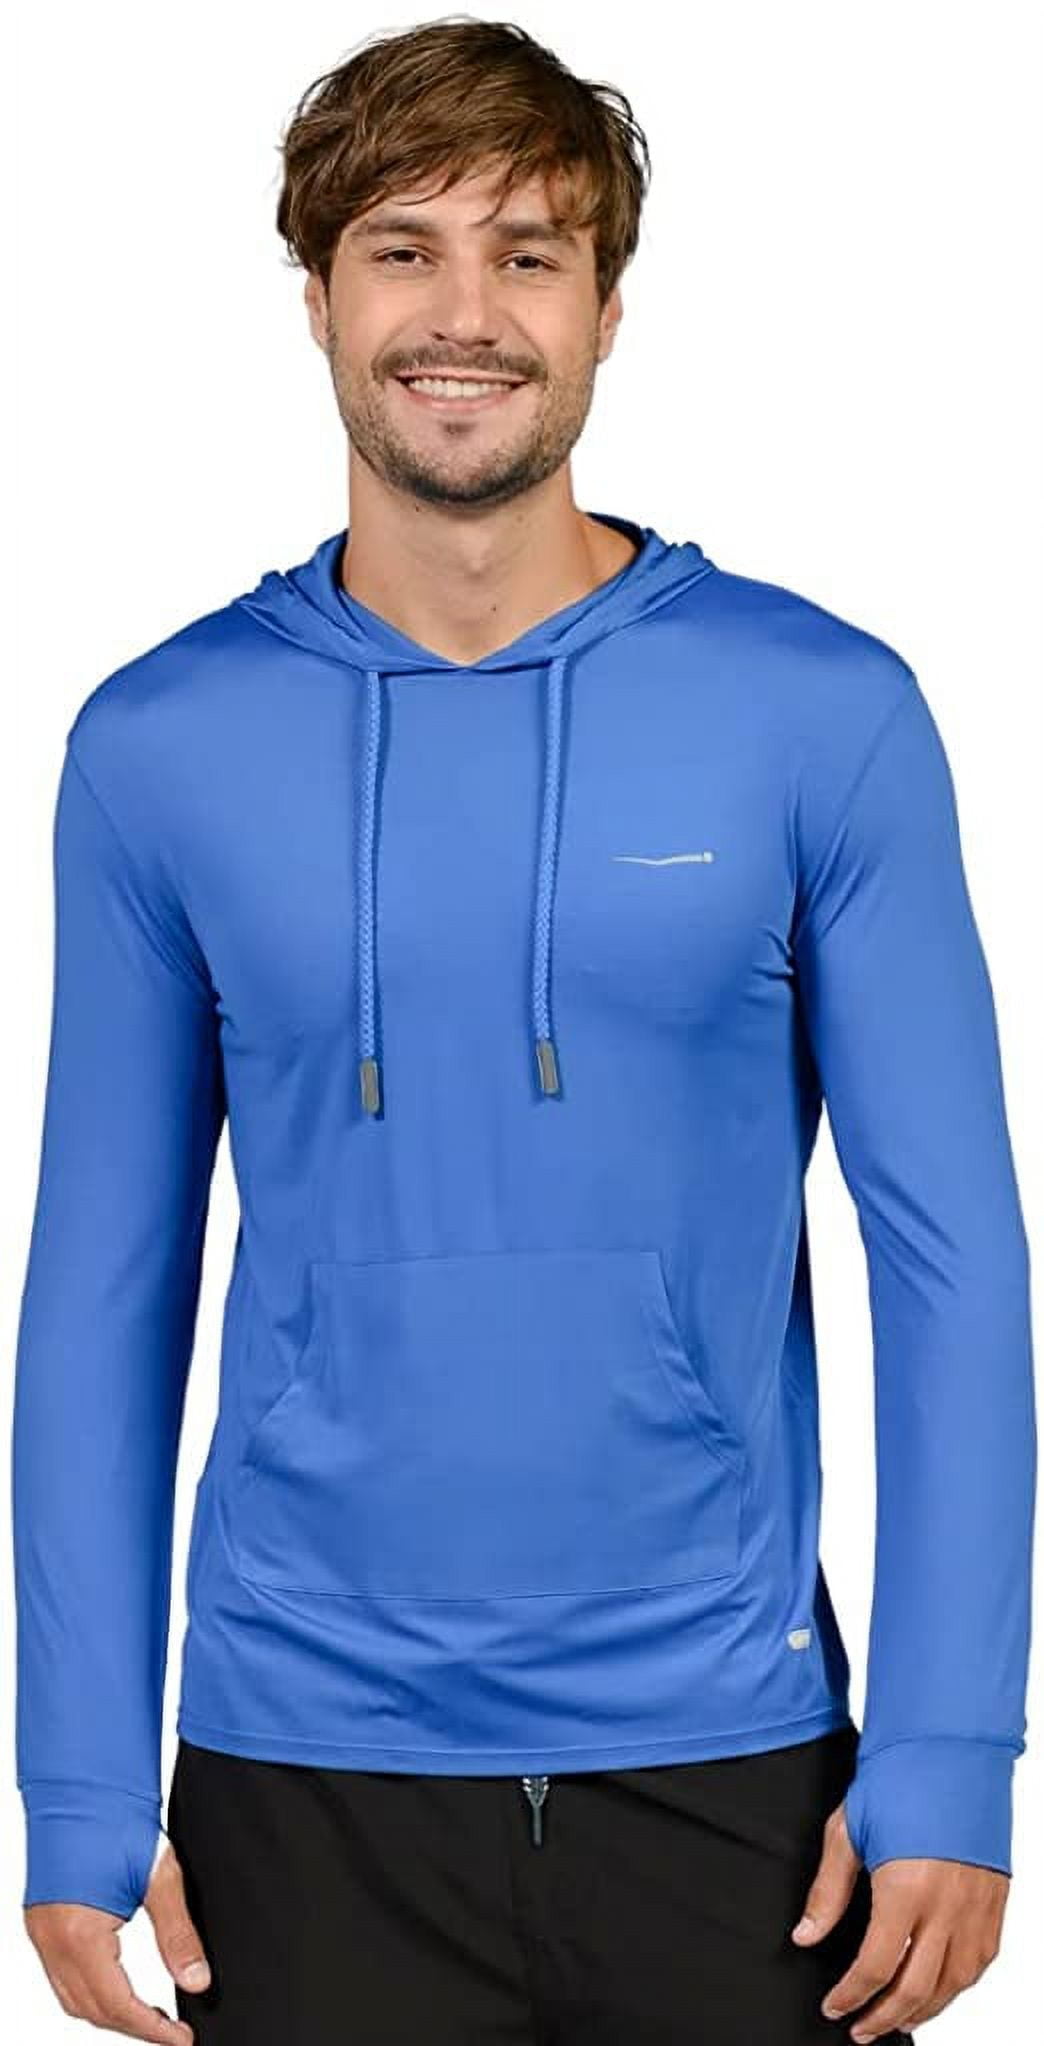 Wave Runner UV Protection Clothing For Men Hoodies Lightweight